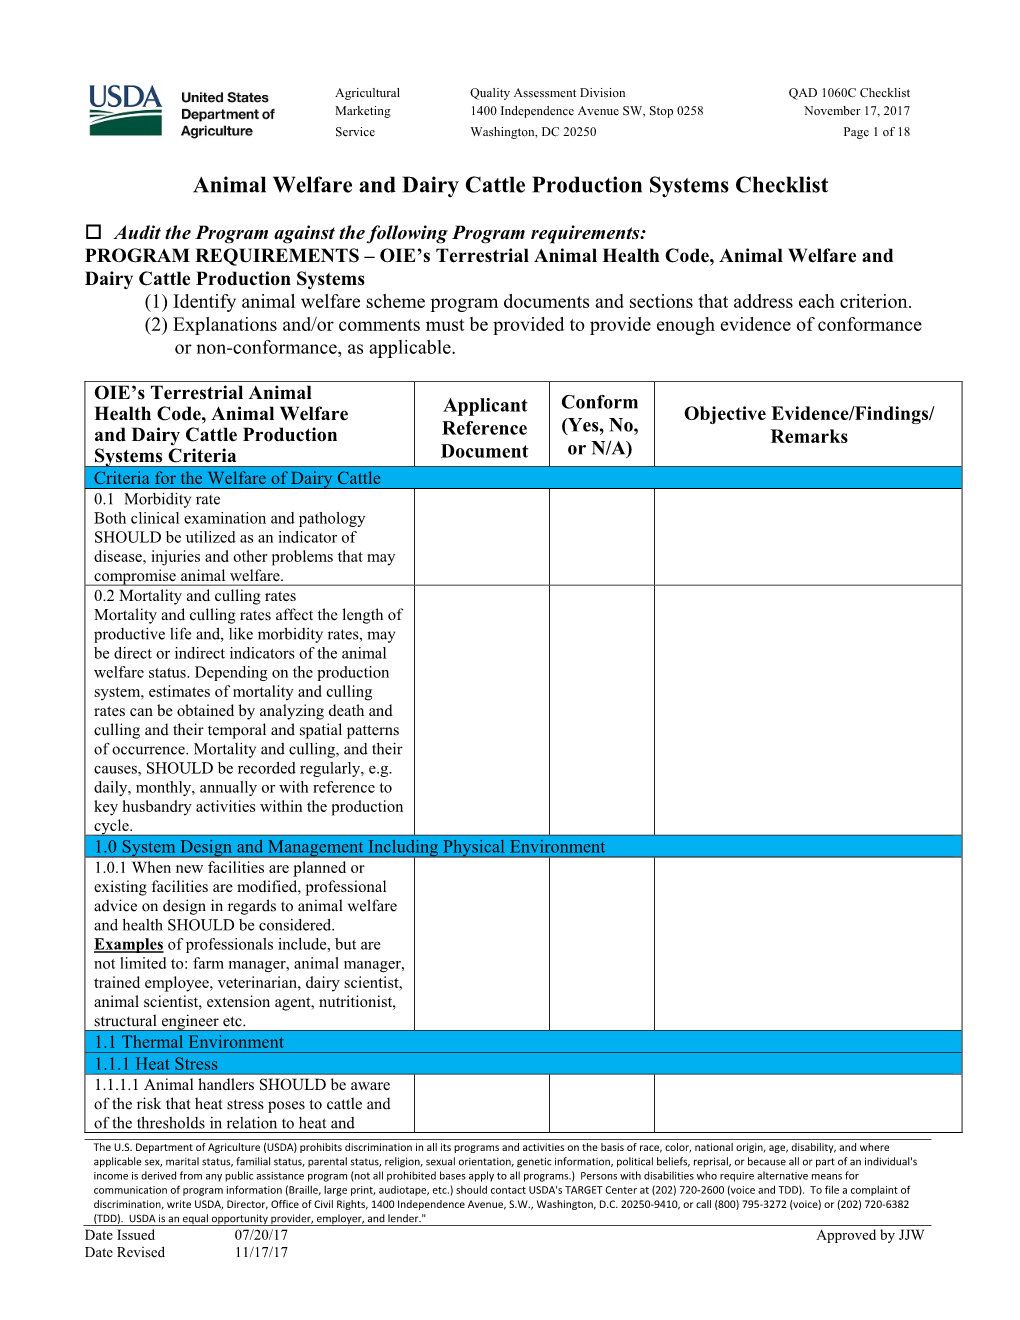 Animal Welfare and Dairy Cattle Production Systems Checklist